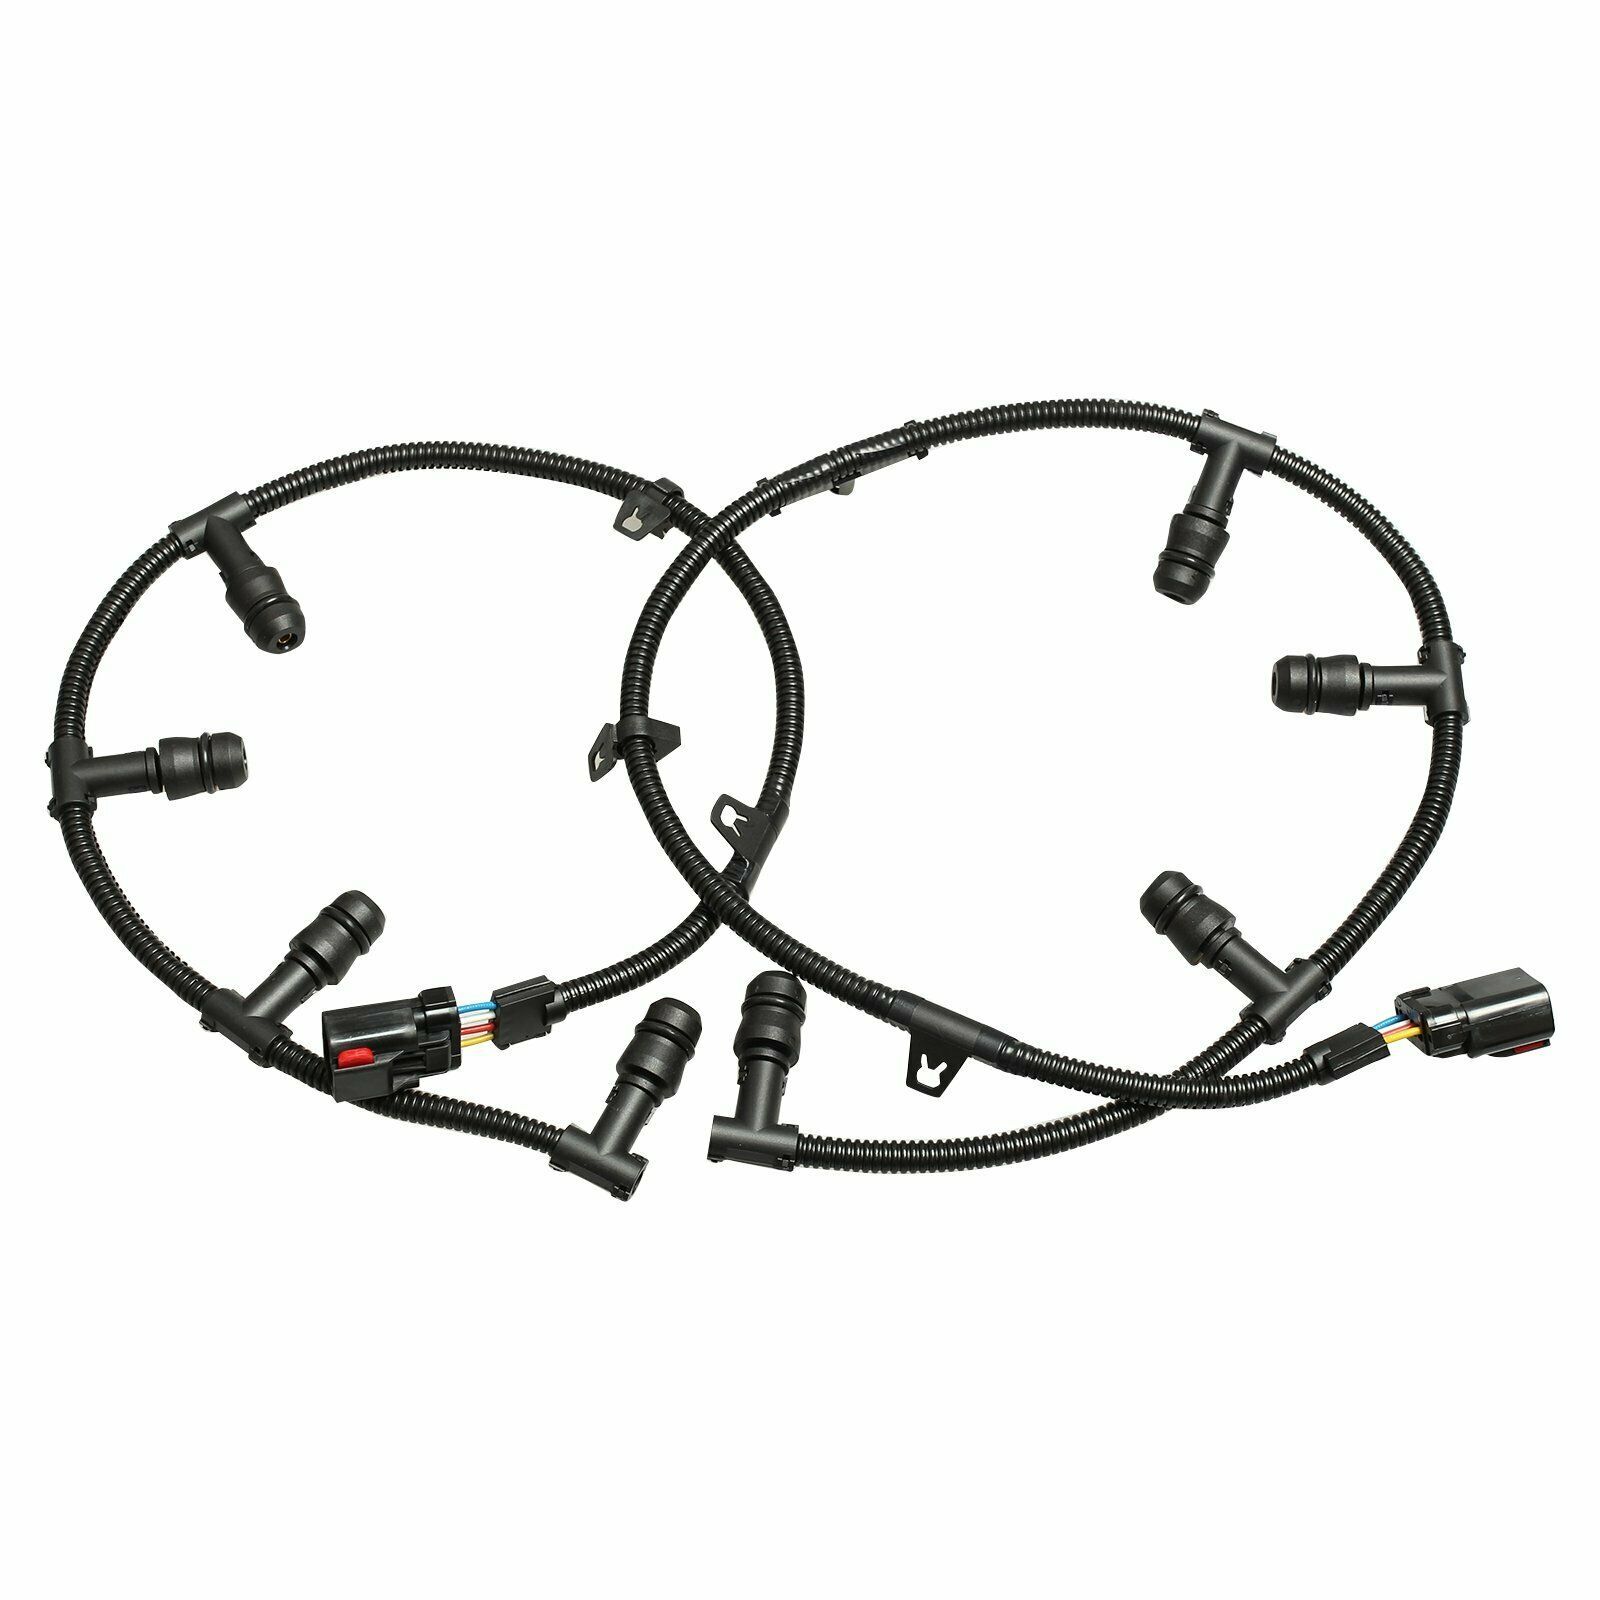 Glow Plug Harness Right & Left Harness tool For 6.0L 2004-2010 Ford Diesel